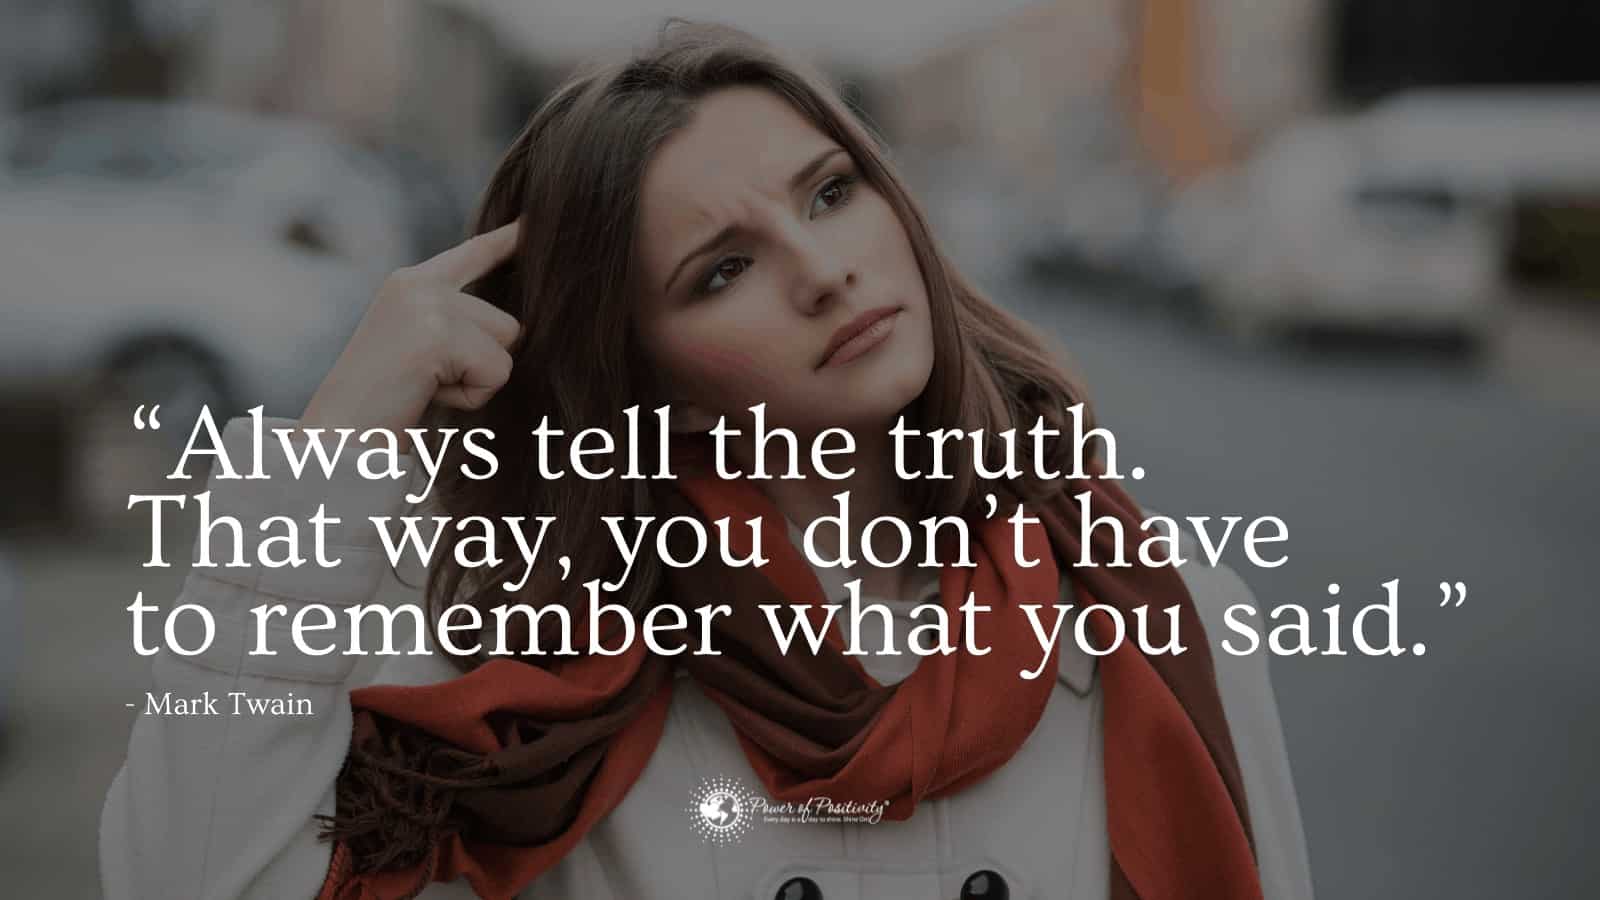 15 Quotes About Telling the Truth, Even When It’s Hard